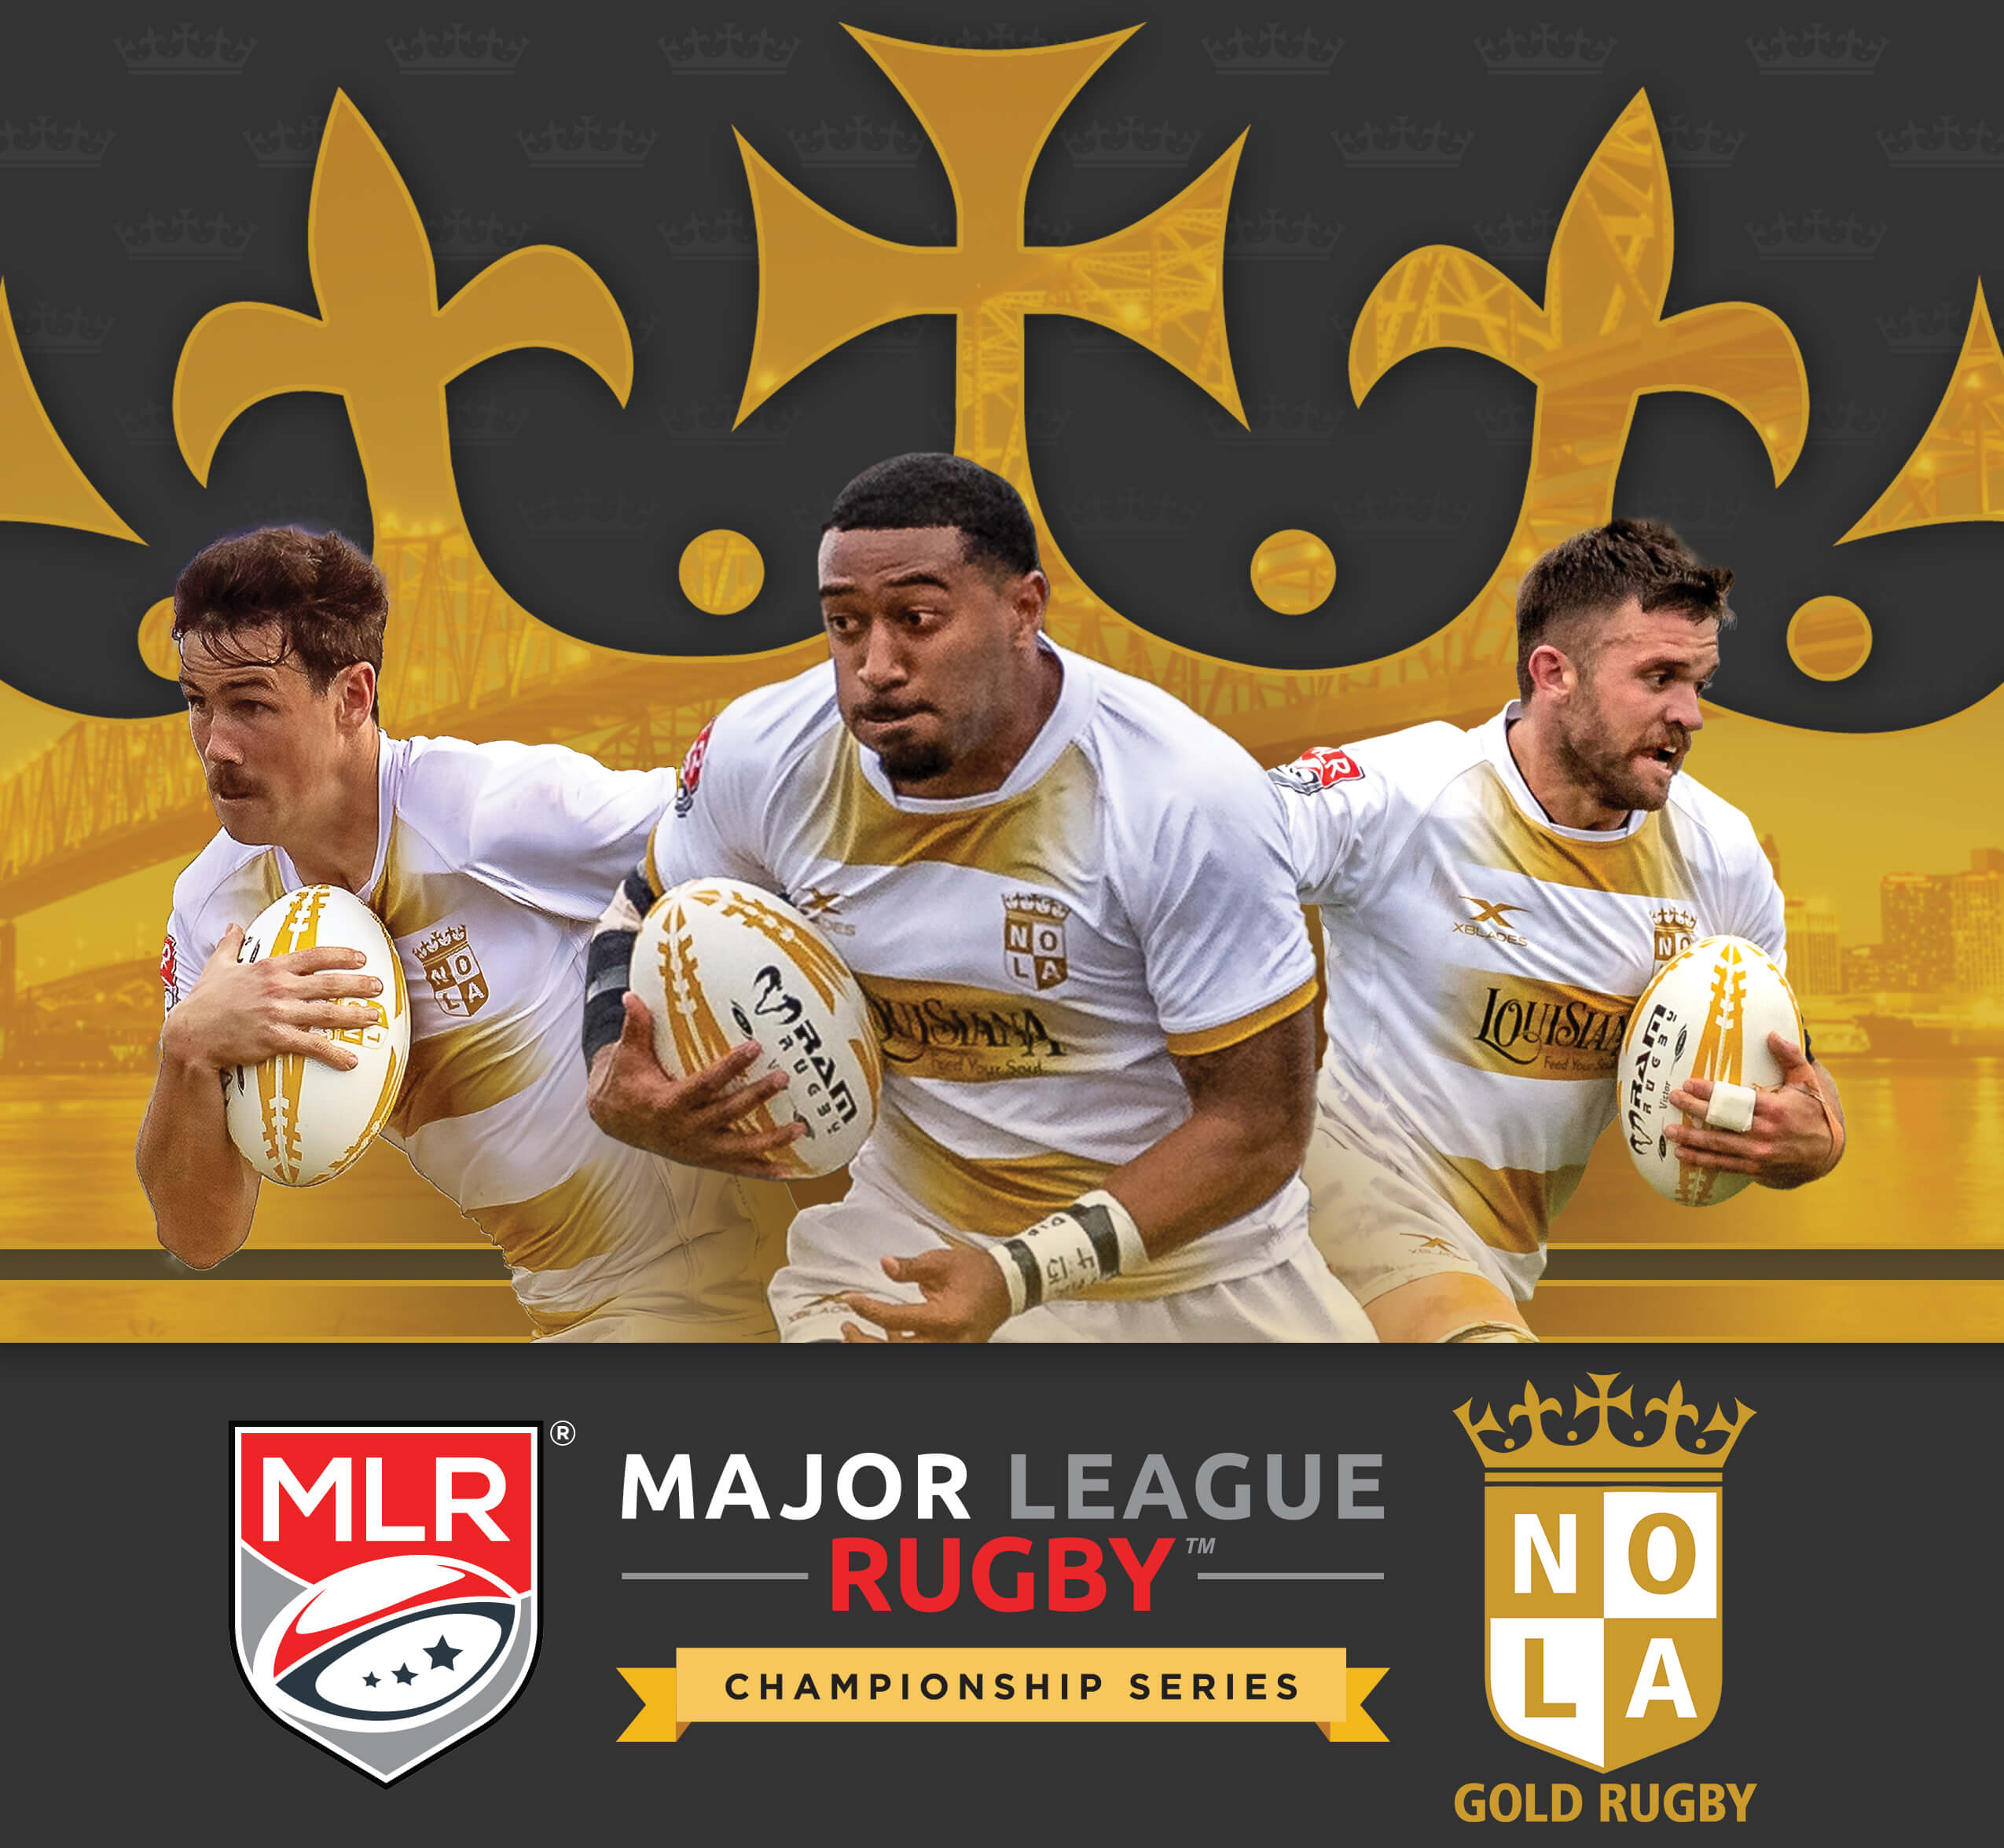 Secure your MLR Championship Series Tickets Now!